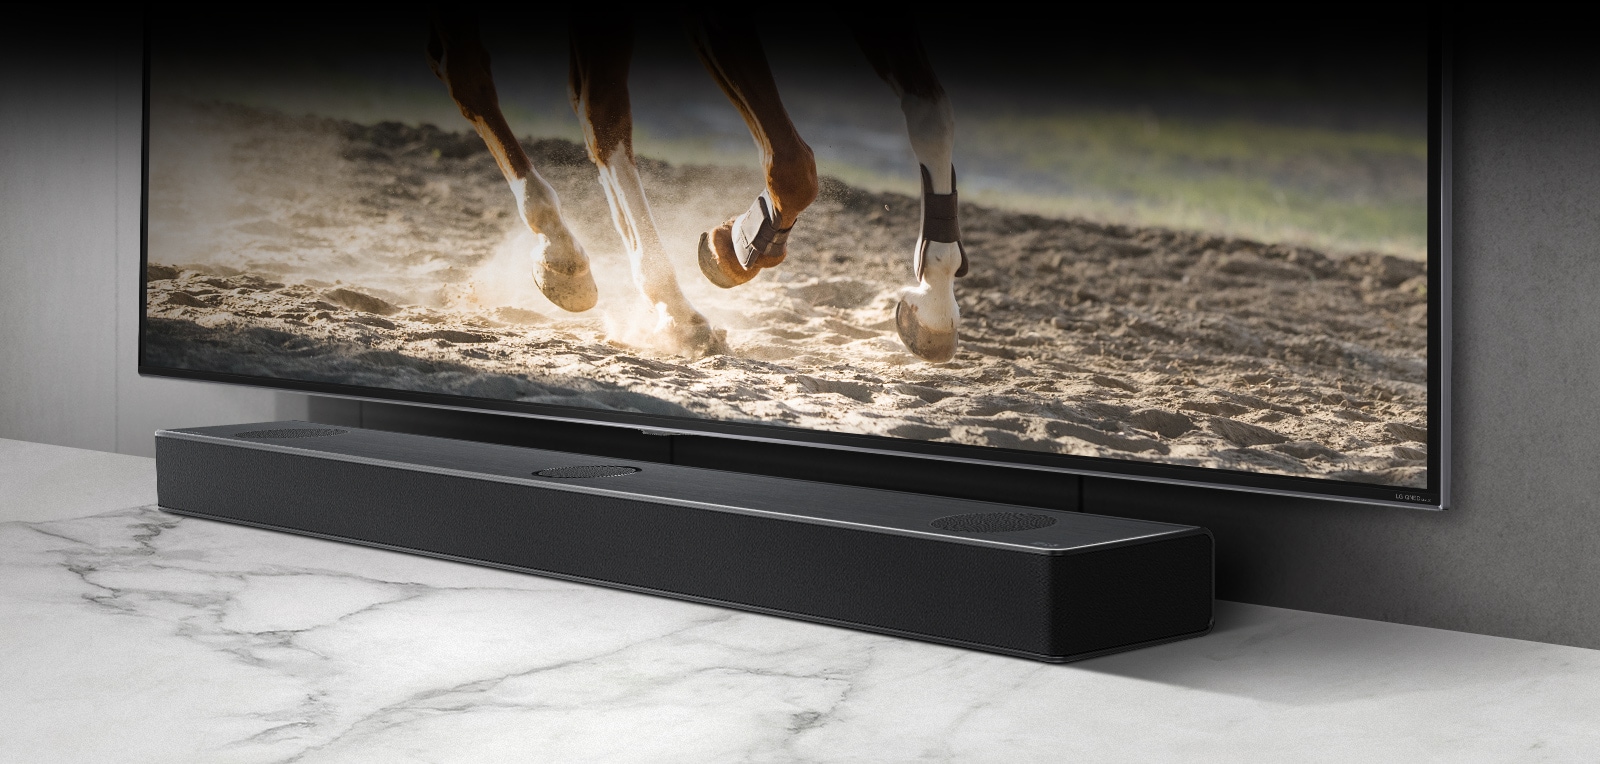 The perfectly paired is shown through a close-up shot of the matching TV and sound bar.